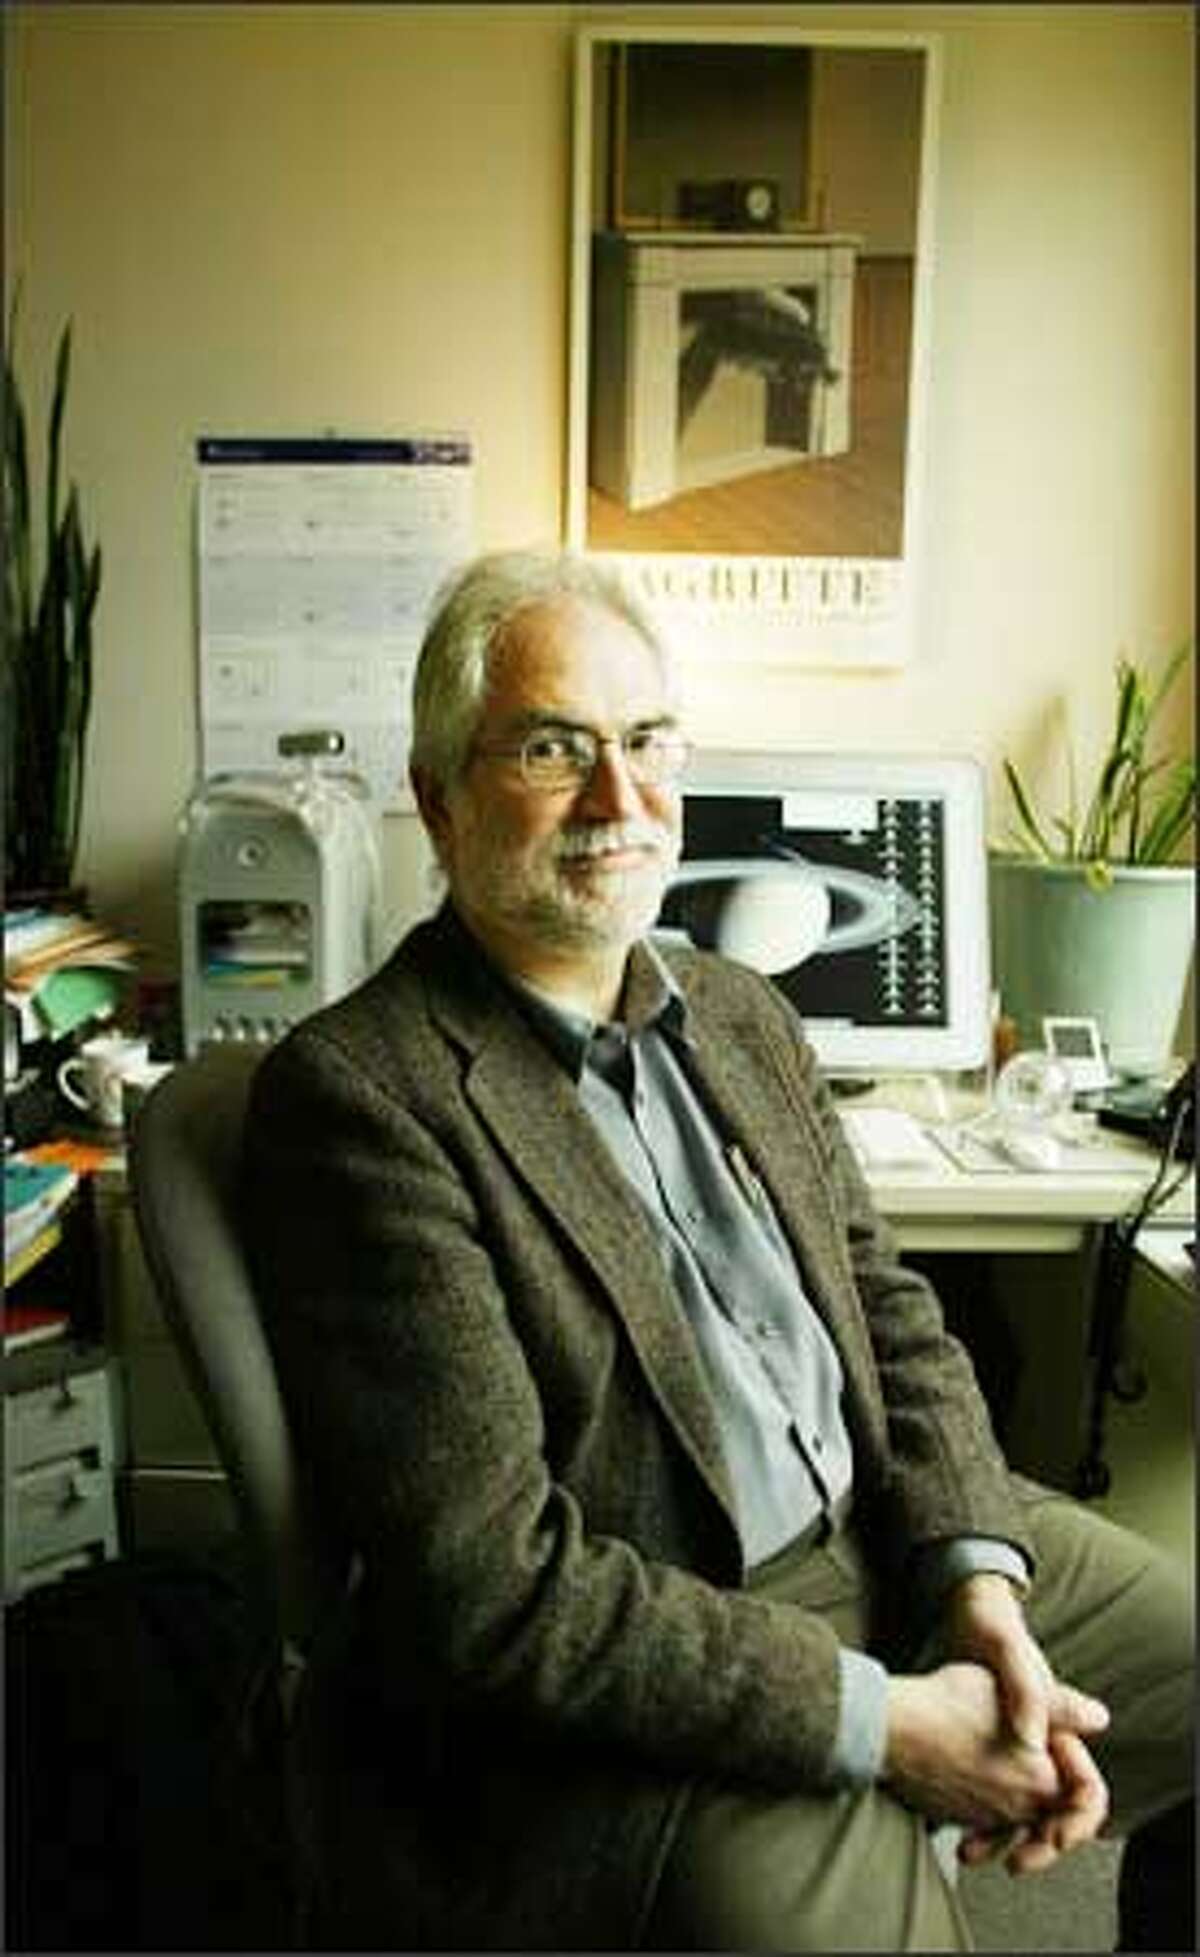 Paul Yager, pictured in his office, says: "I spend time worrying about how to raise more money. You're always looking."